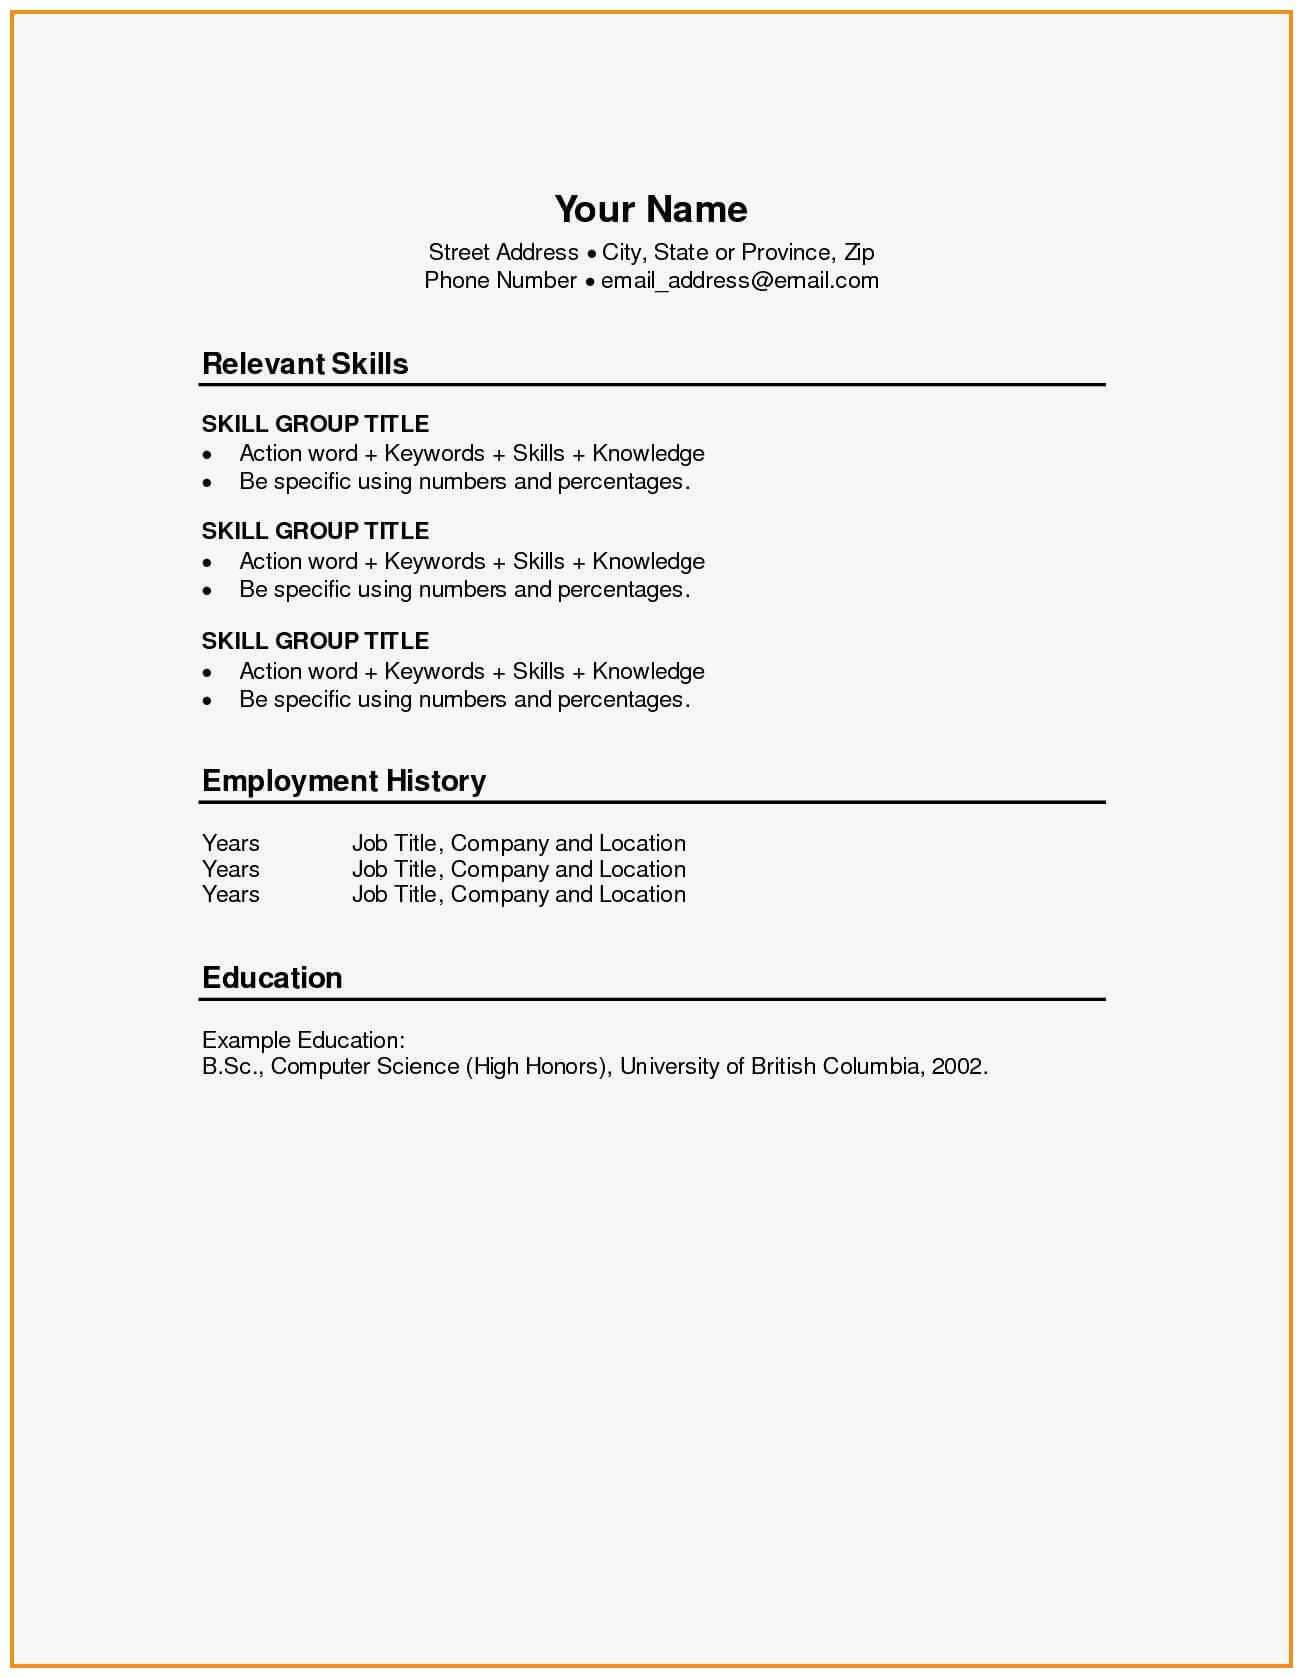 57 Inspirational Gallery Of Microsoft Word 2007 Resume Intended For Resume Templates Microsoft Word 2010